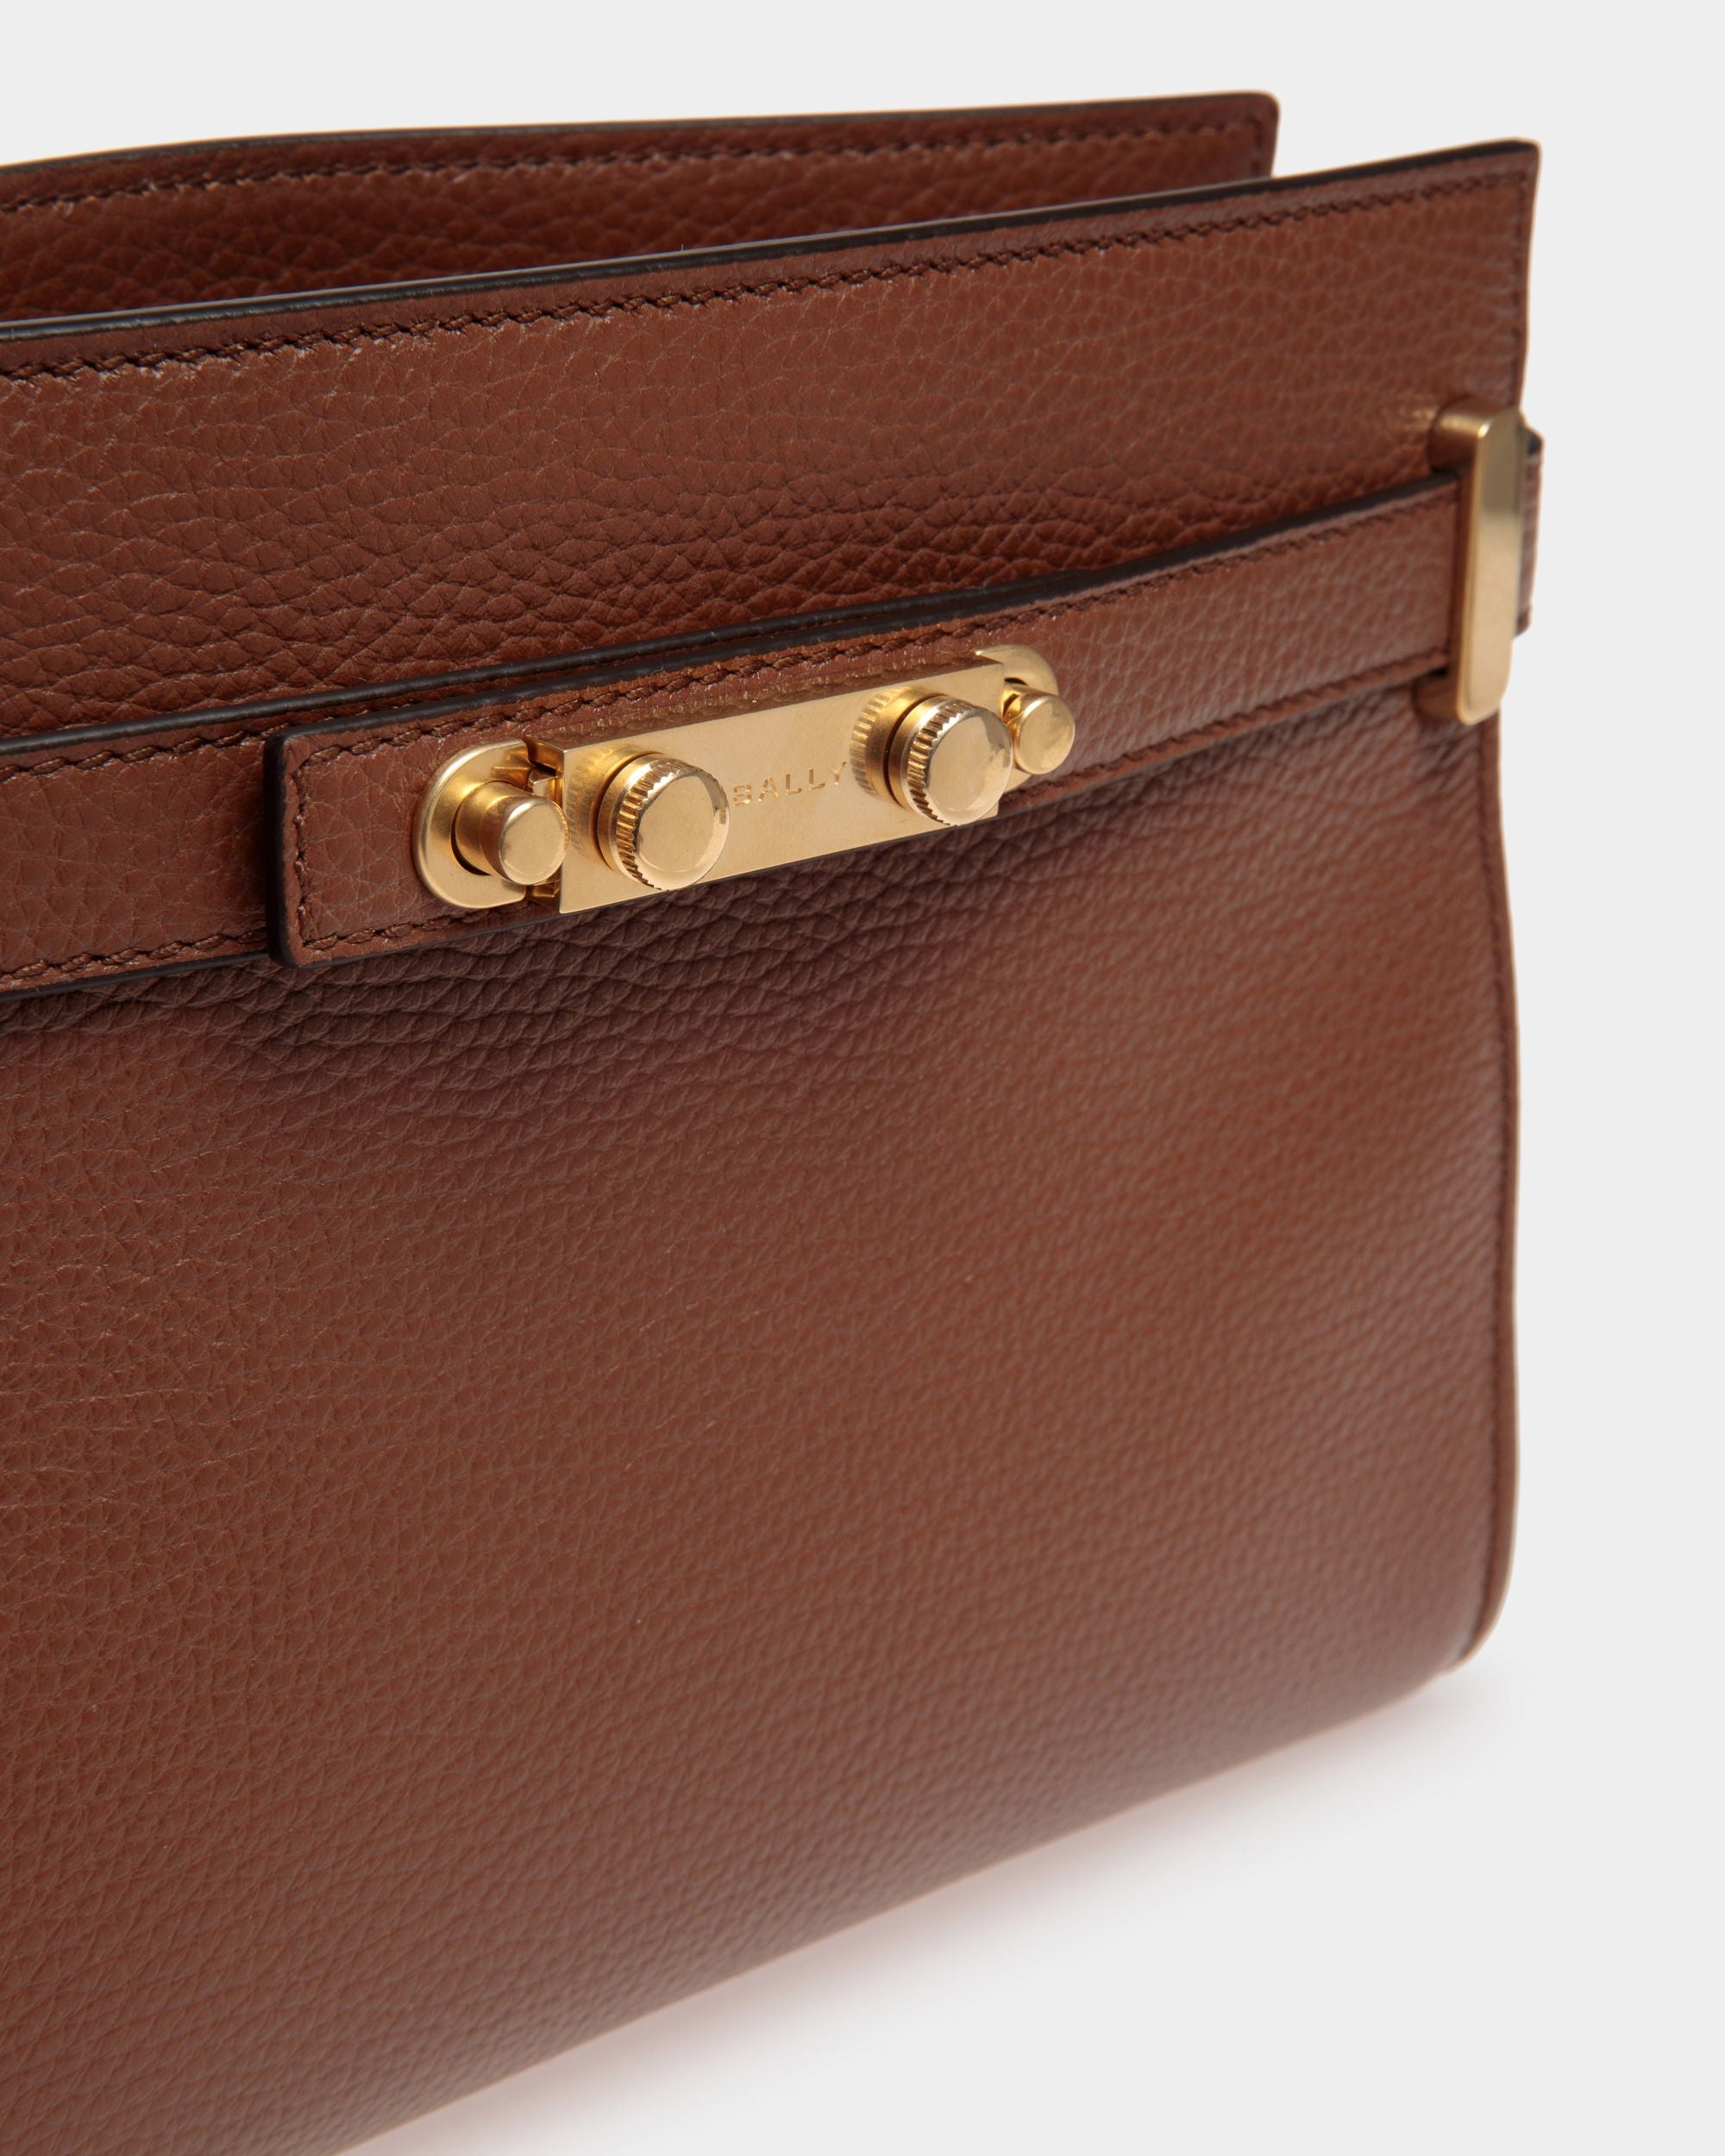 Carriage | Women's Crossbody Bag in Brown Grained Leather | Bally | Still Life Detail